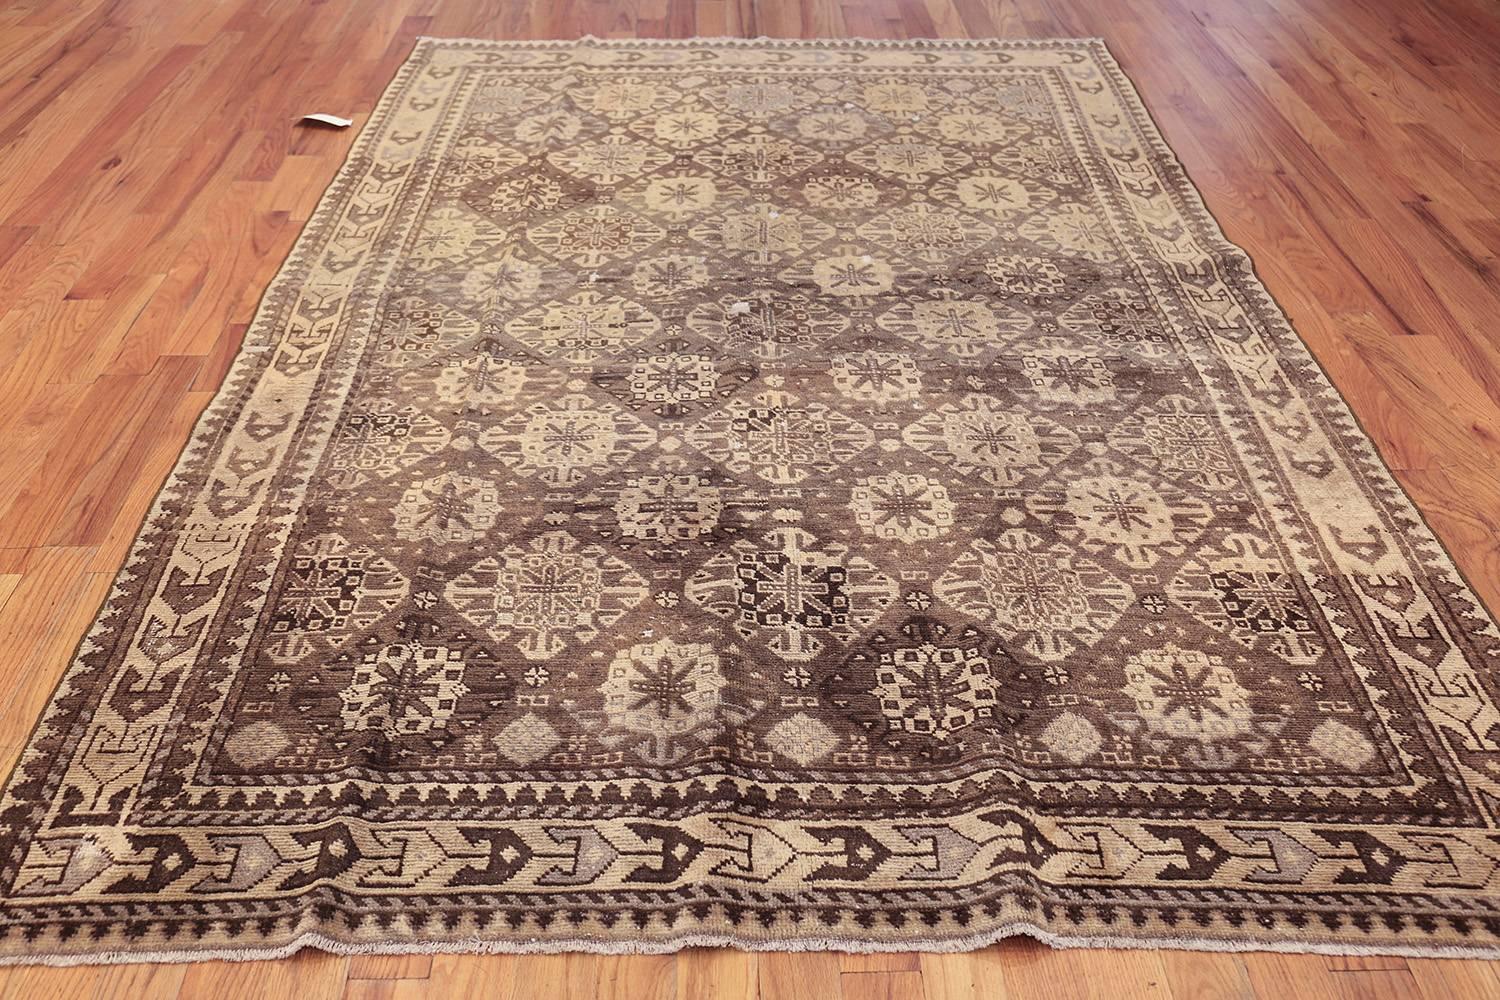 Early 20th Century Antique East Turkestan Khotan Rug. Size: 6 ft 6 in x 9 ft For Sale